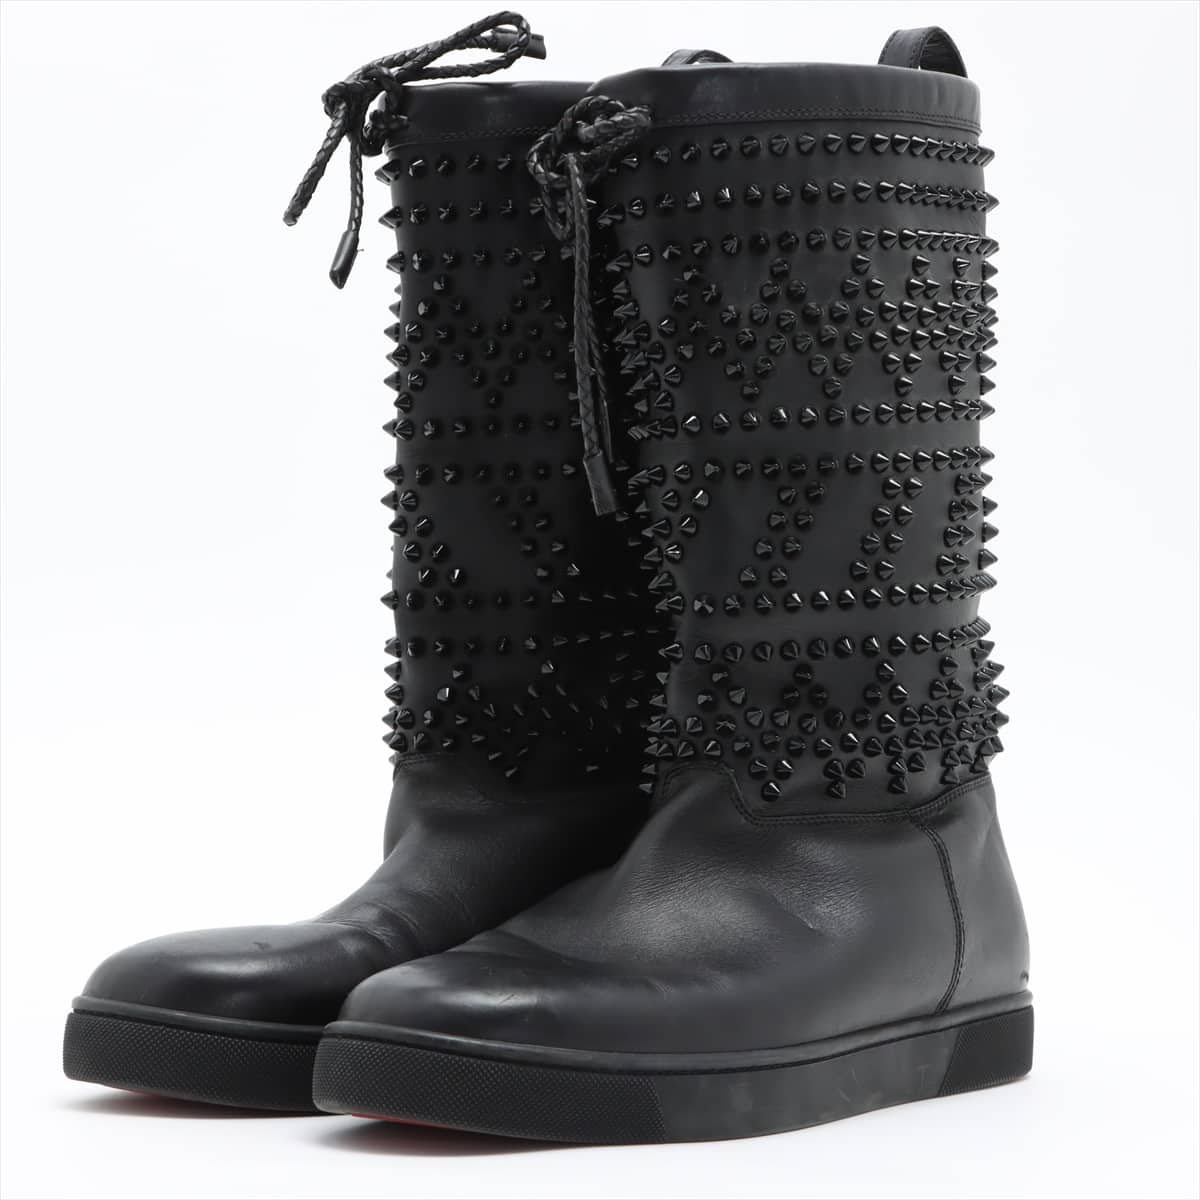 Christian Louboutin Leather Boots No notation Men's Black Spike Studs Fur